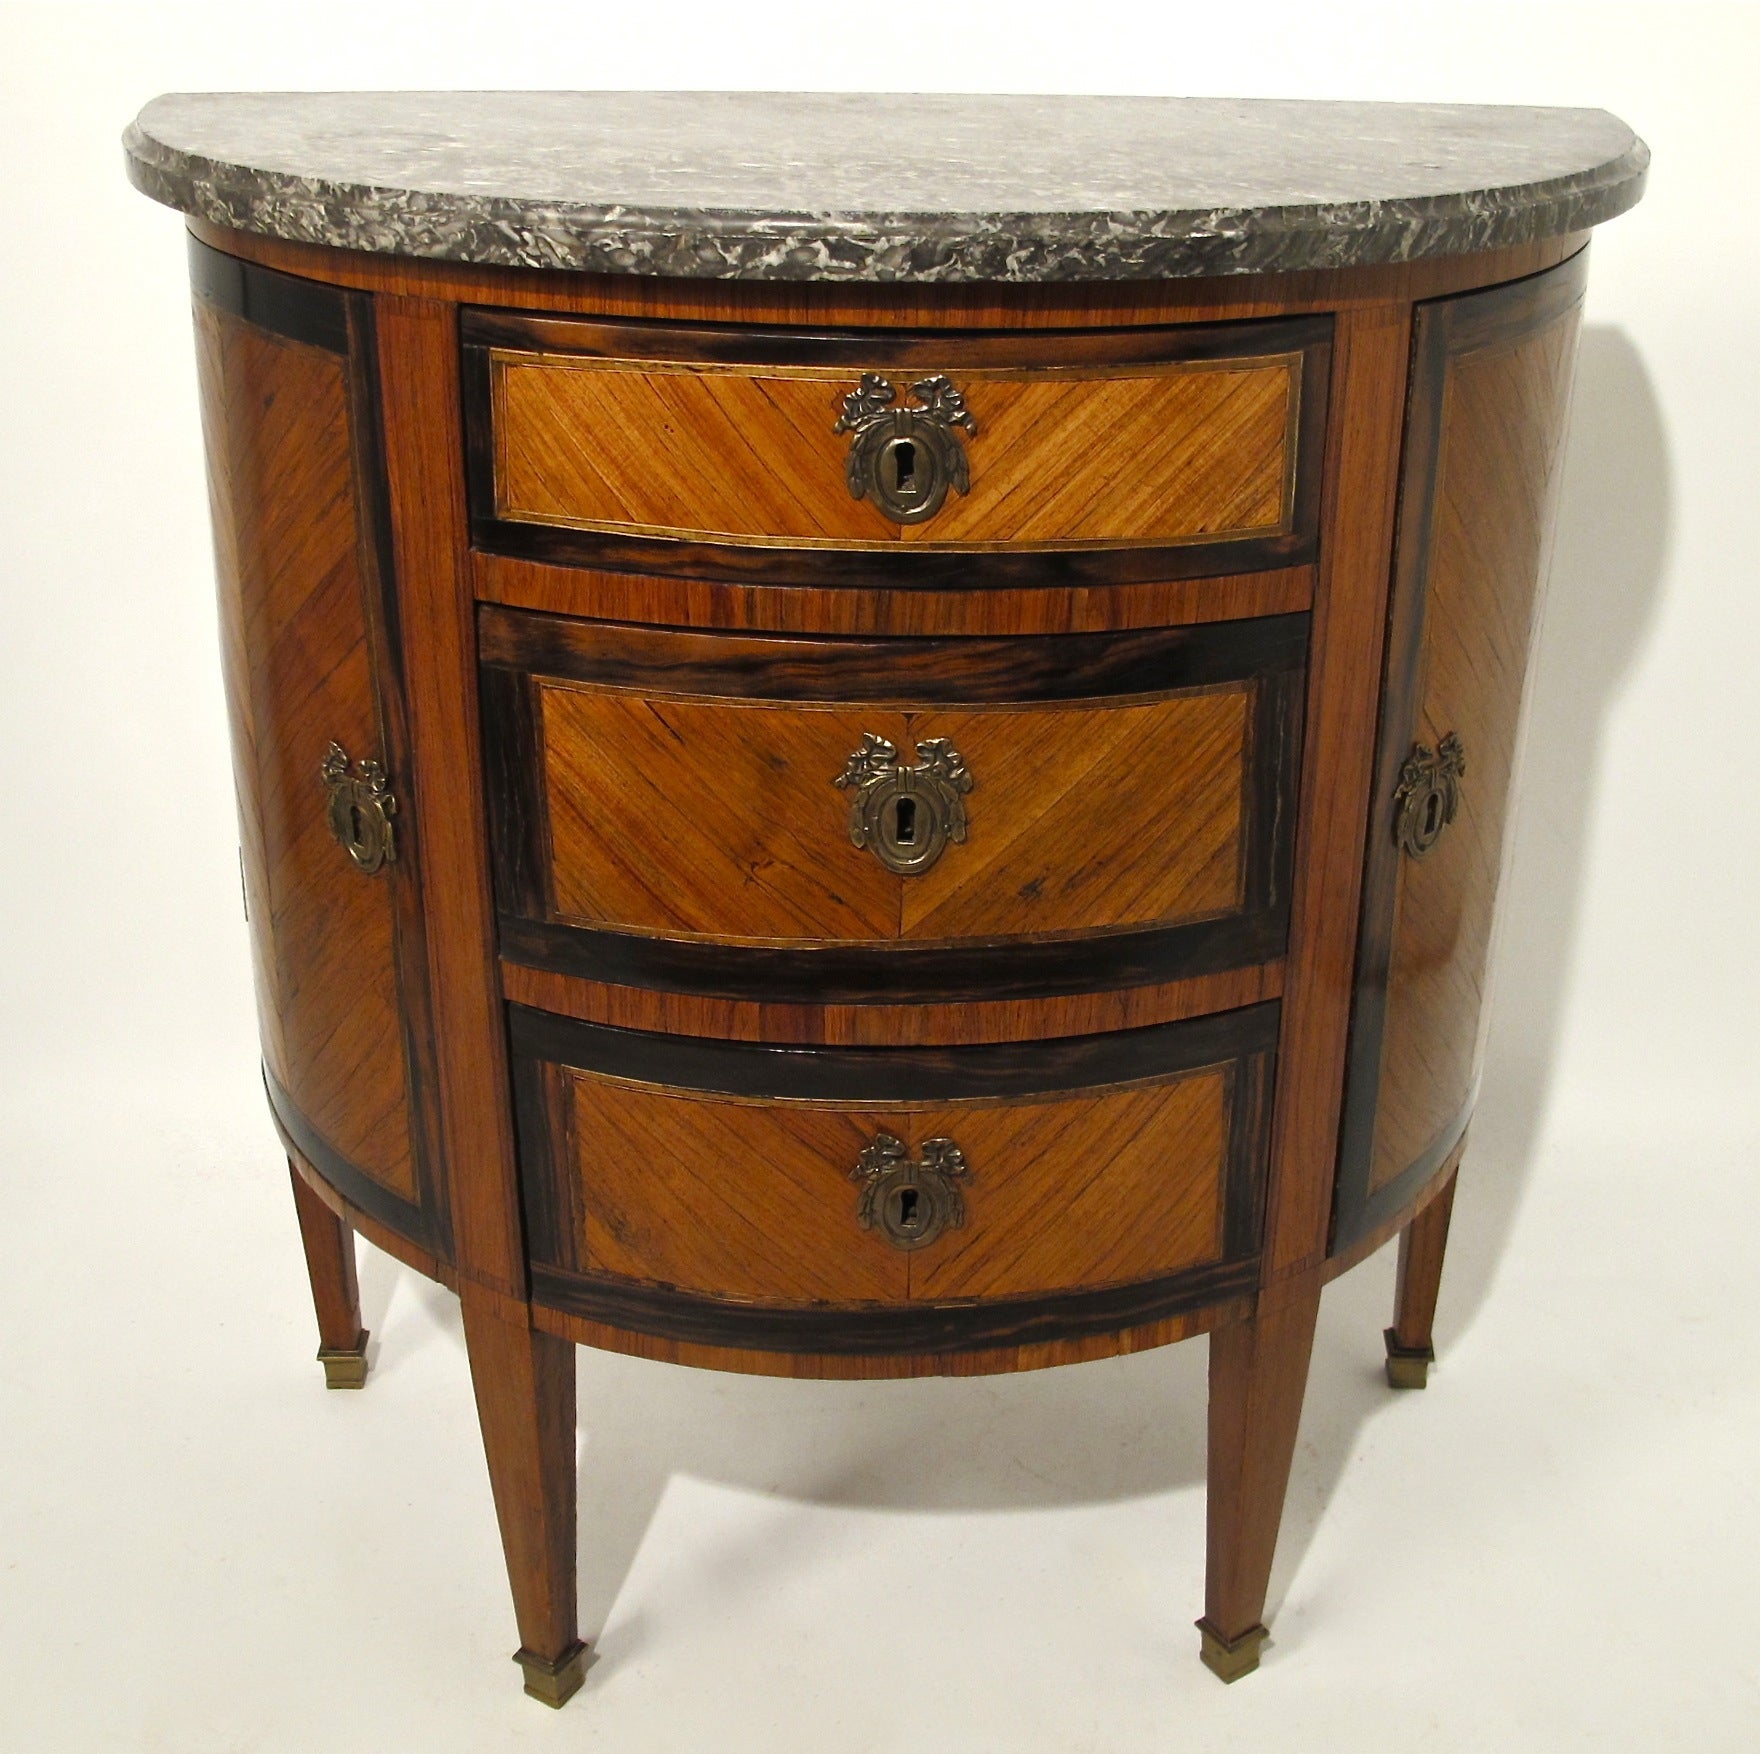 French Rosewood Demi Lune Parquetry Inlay Cabinet, 18th Century For Sale